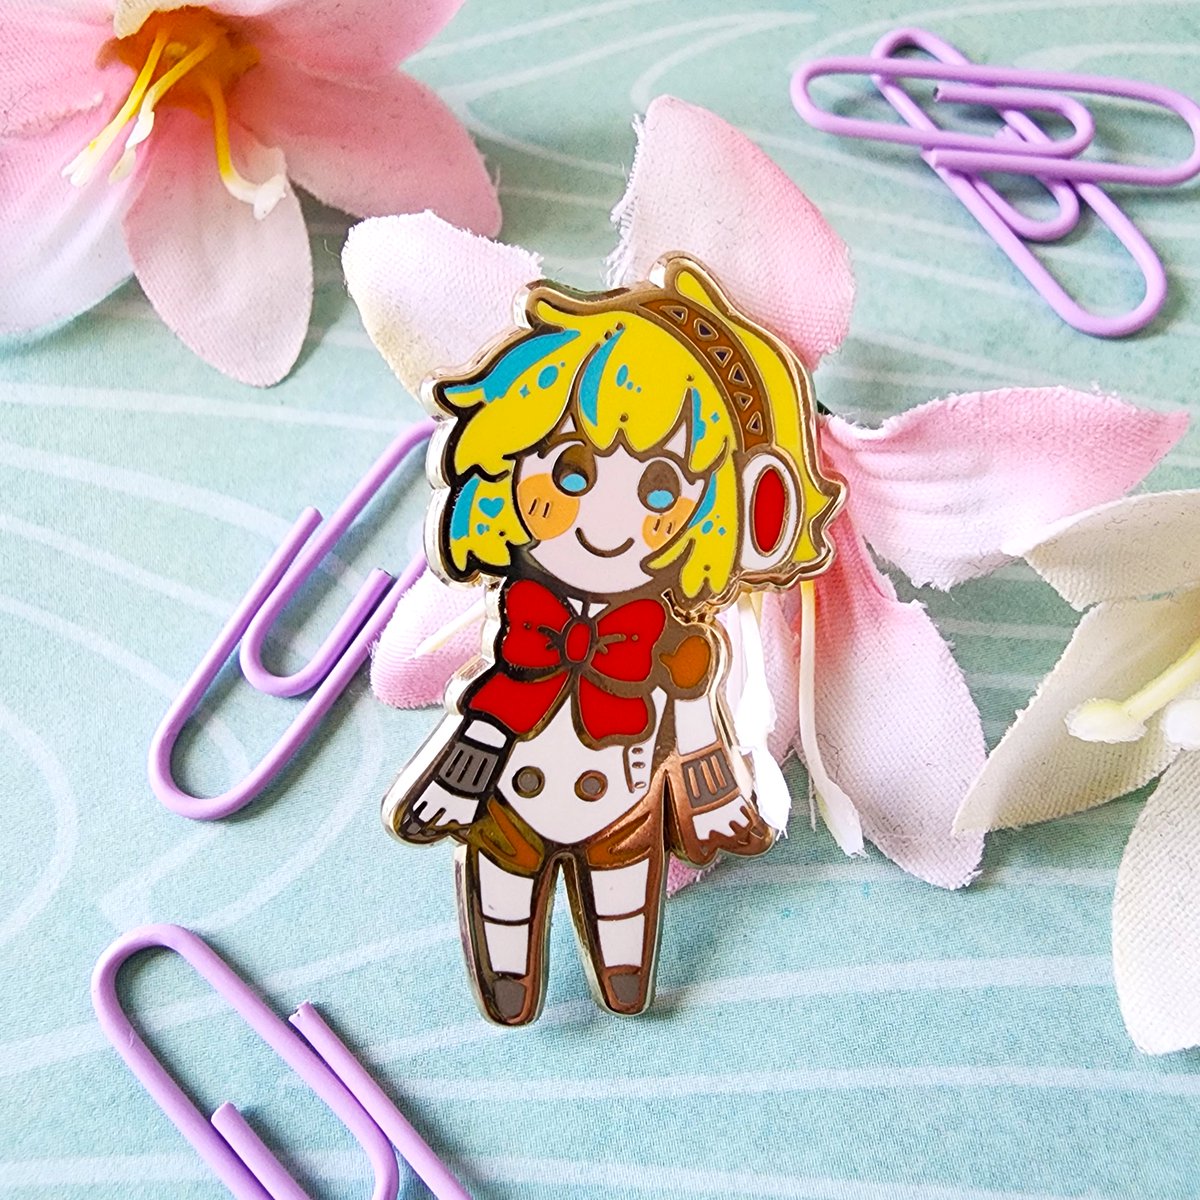 Aigis pin is back instock for preorder!
🔗 below